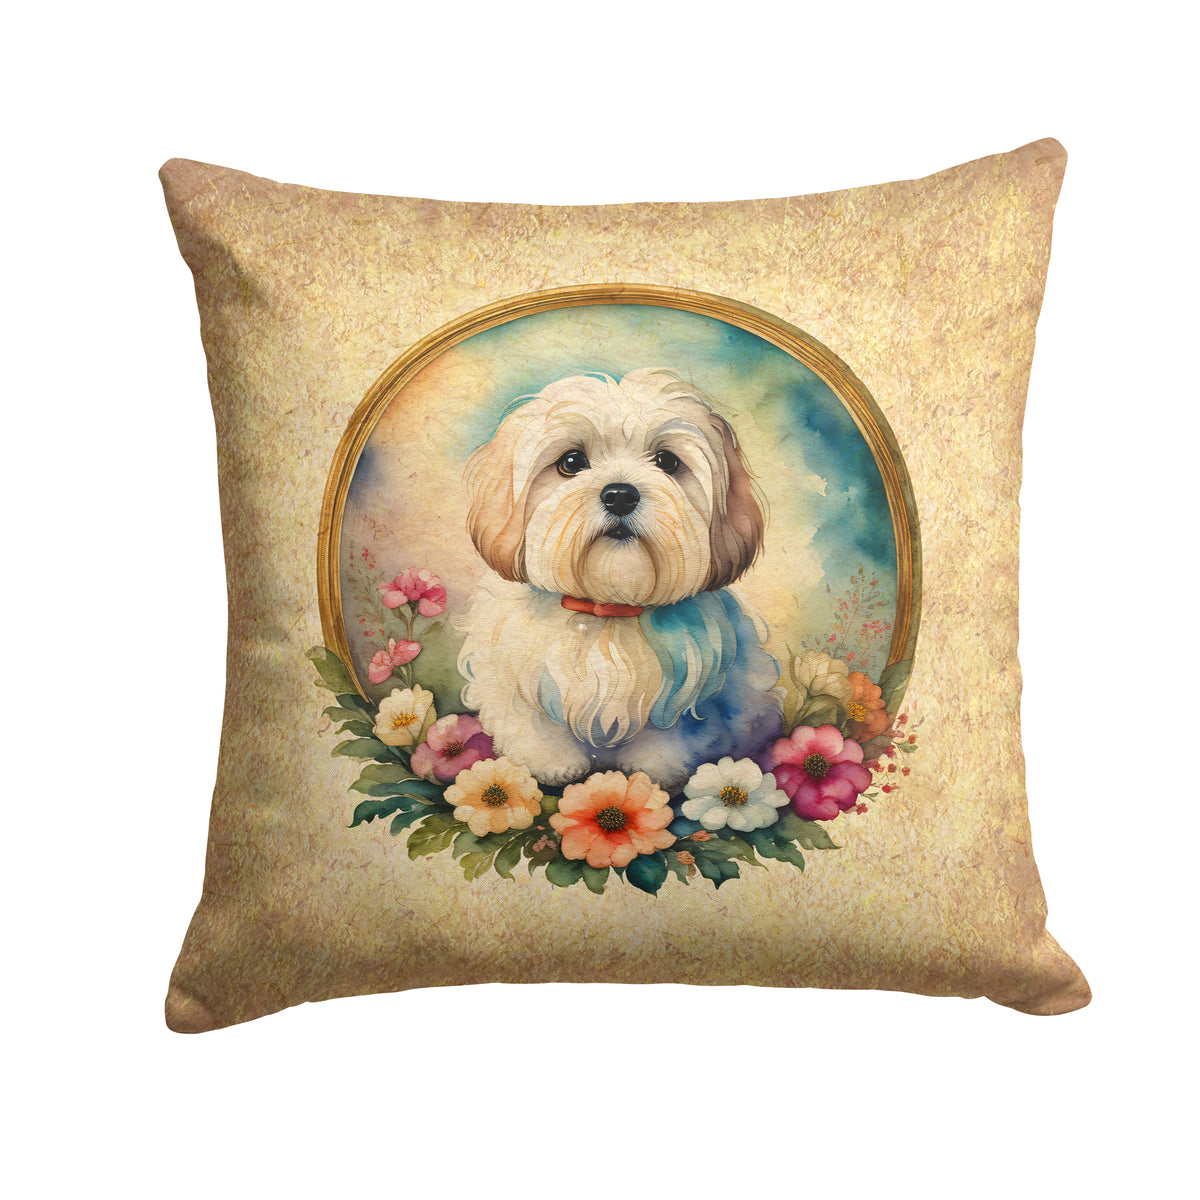 Buy this Coton De Tulear and Flowers Fabric Decorative Pillow